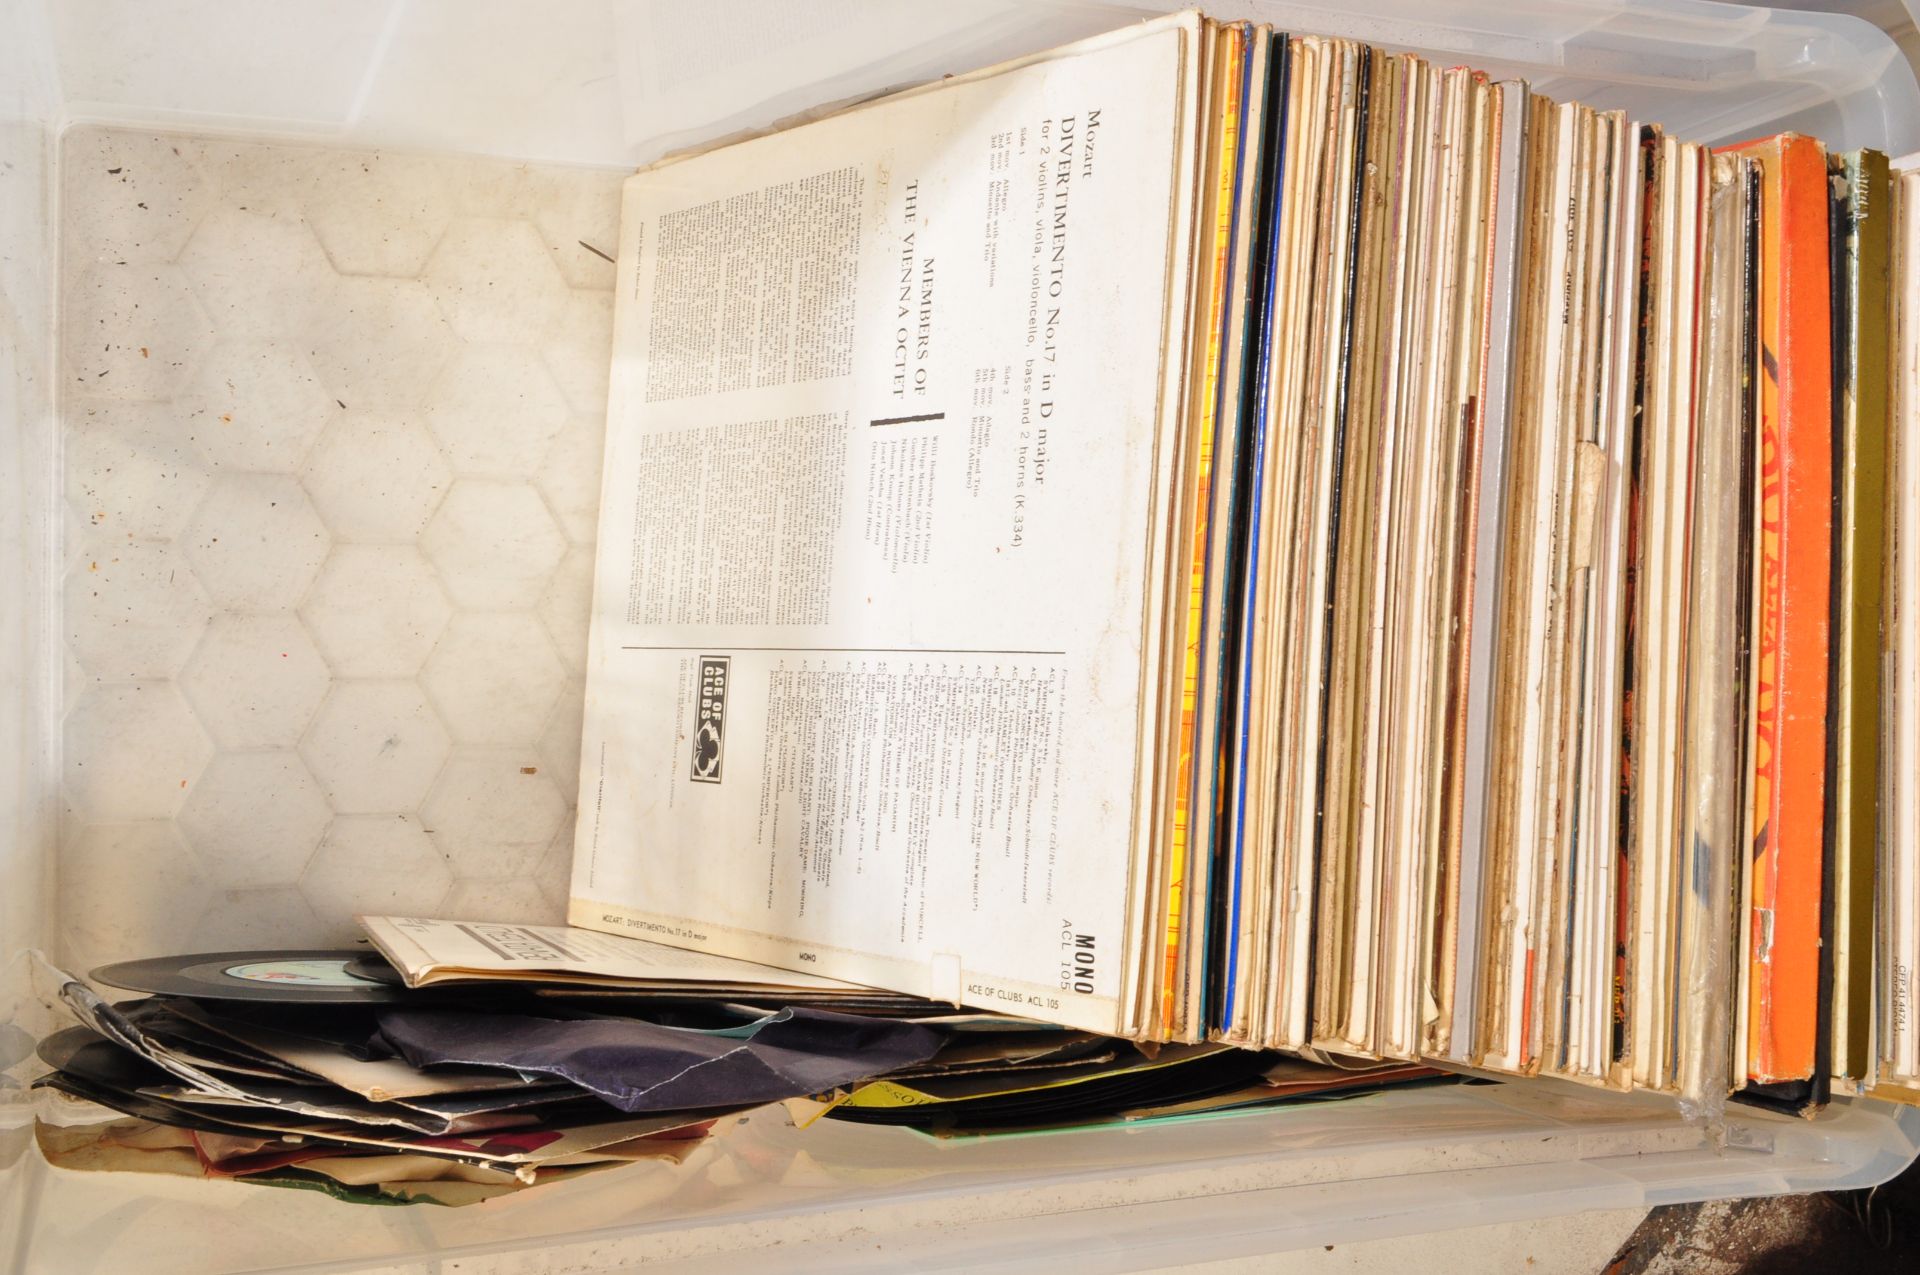 LARGE COLLECTION OF VINTAGE LONG PLAY VINYL RECORDS - Image 4 of 6